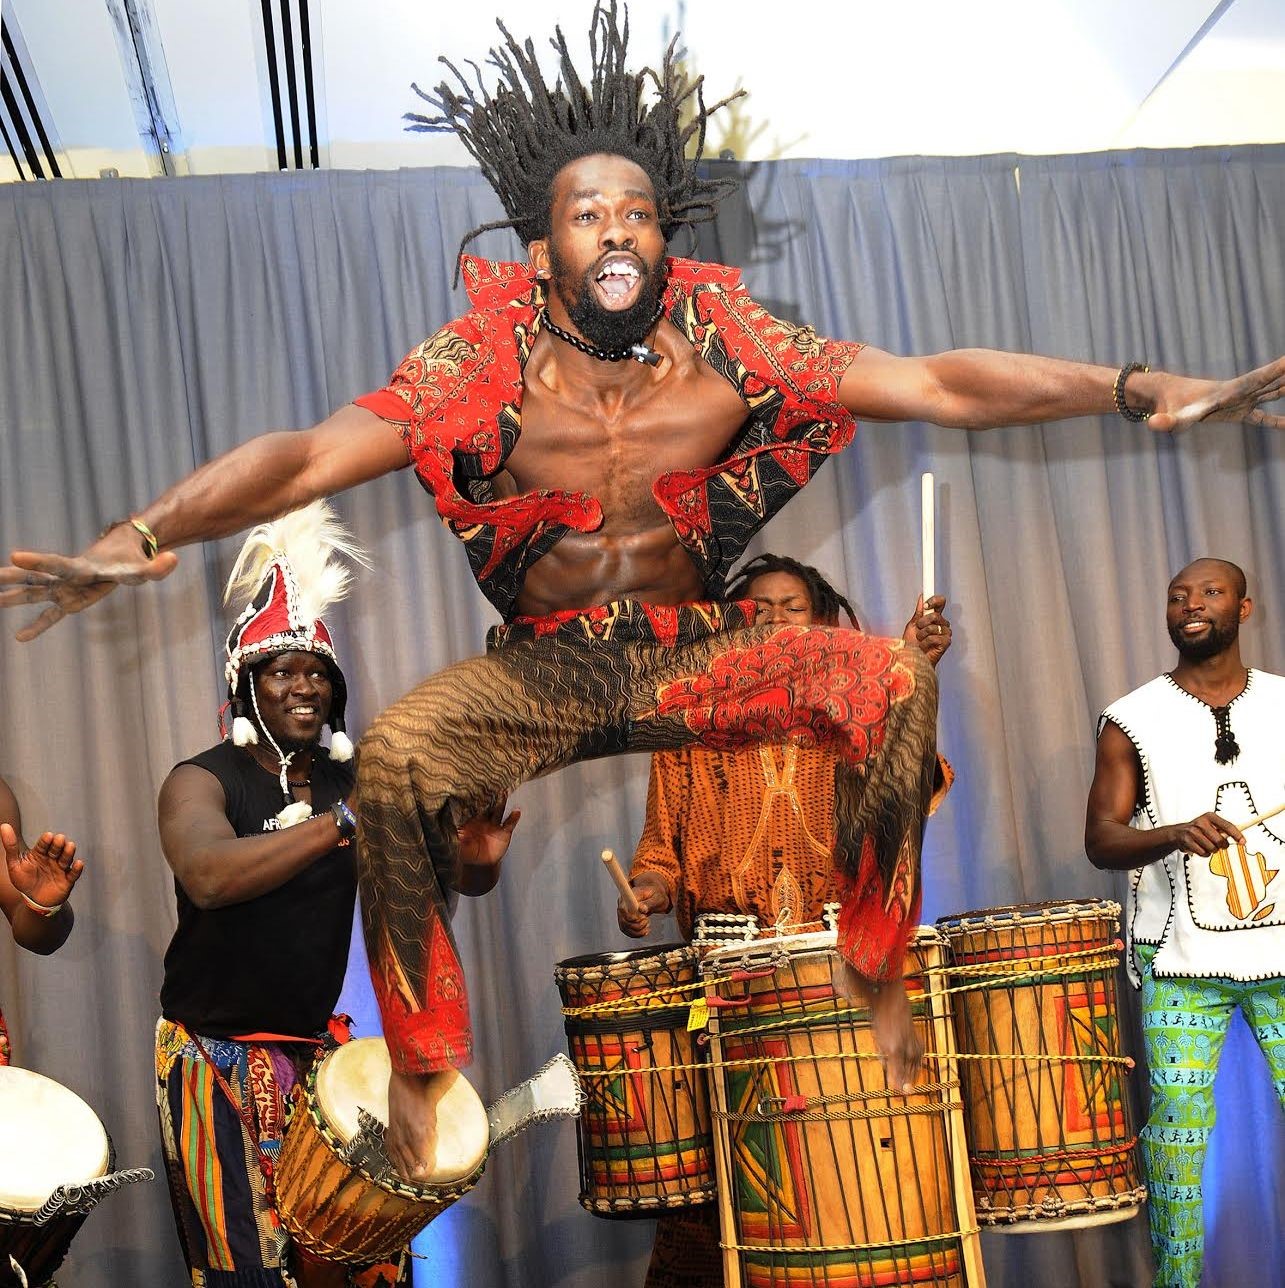 African Drumming Workshop with Shabba – Tuesday August 30th